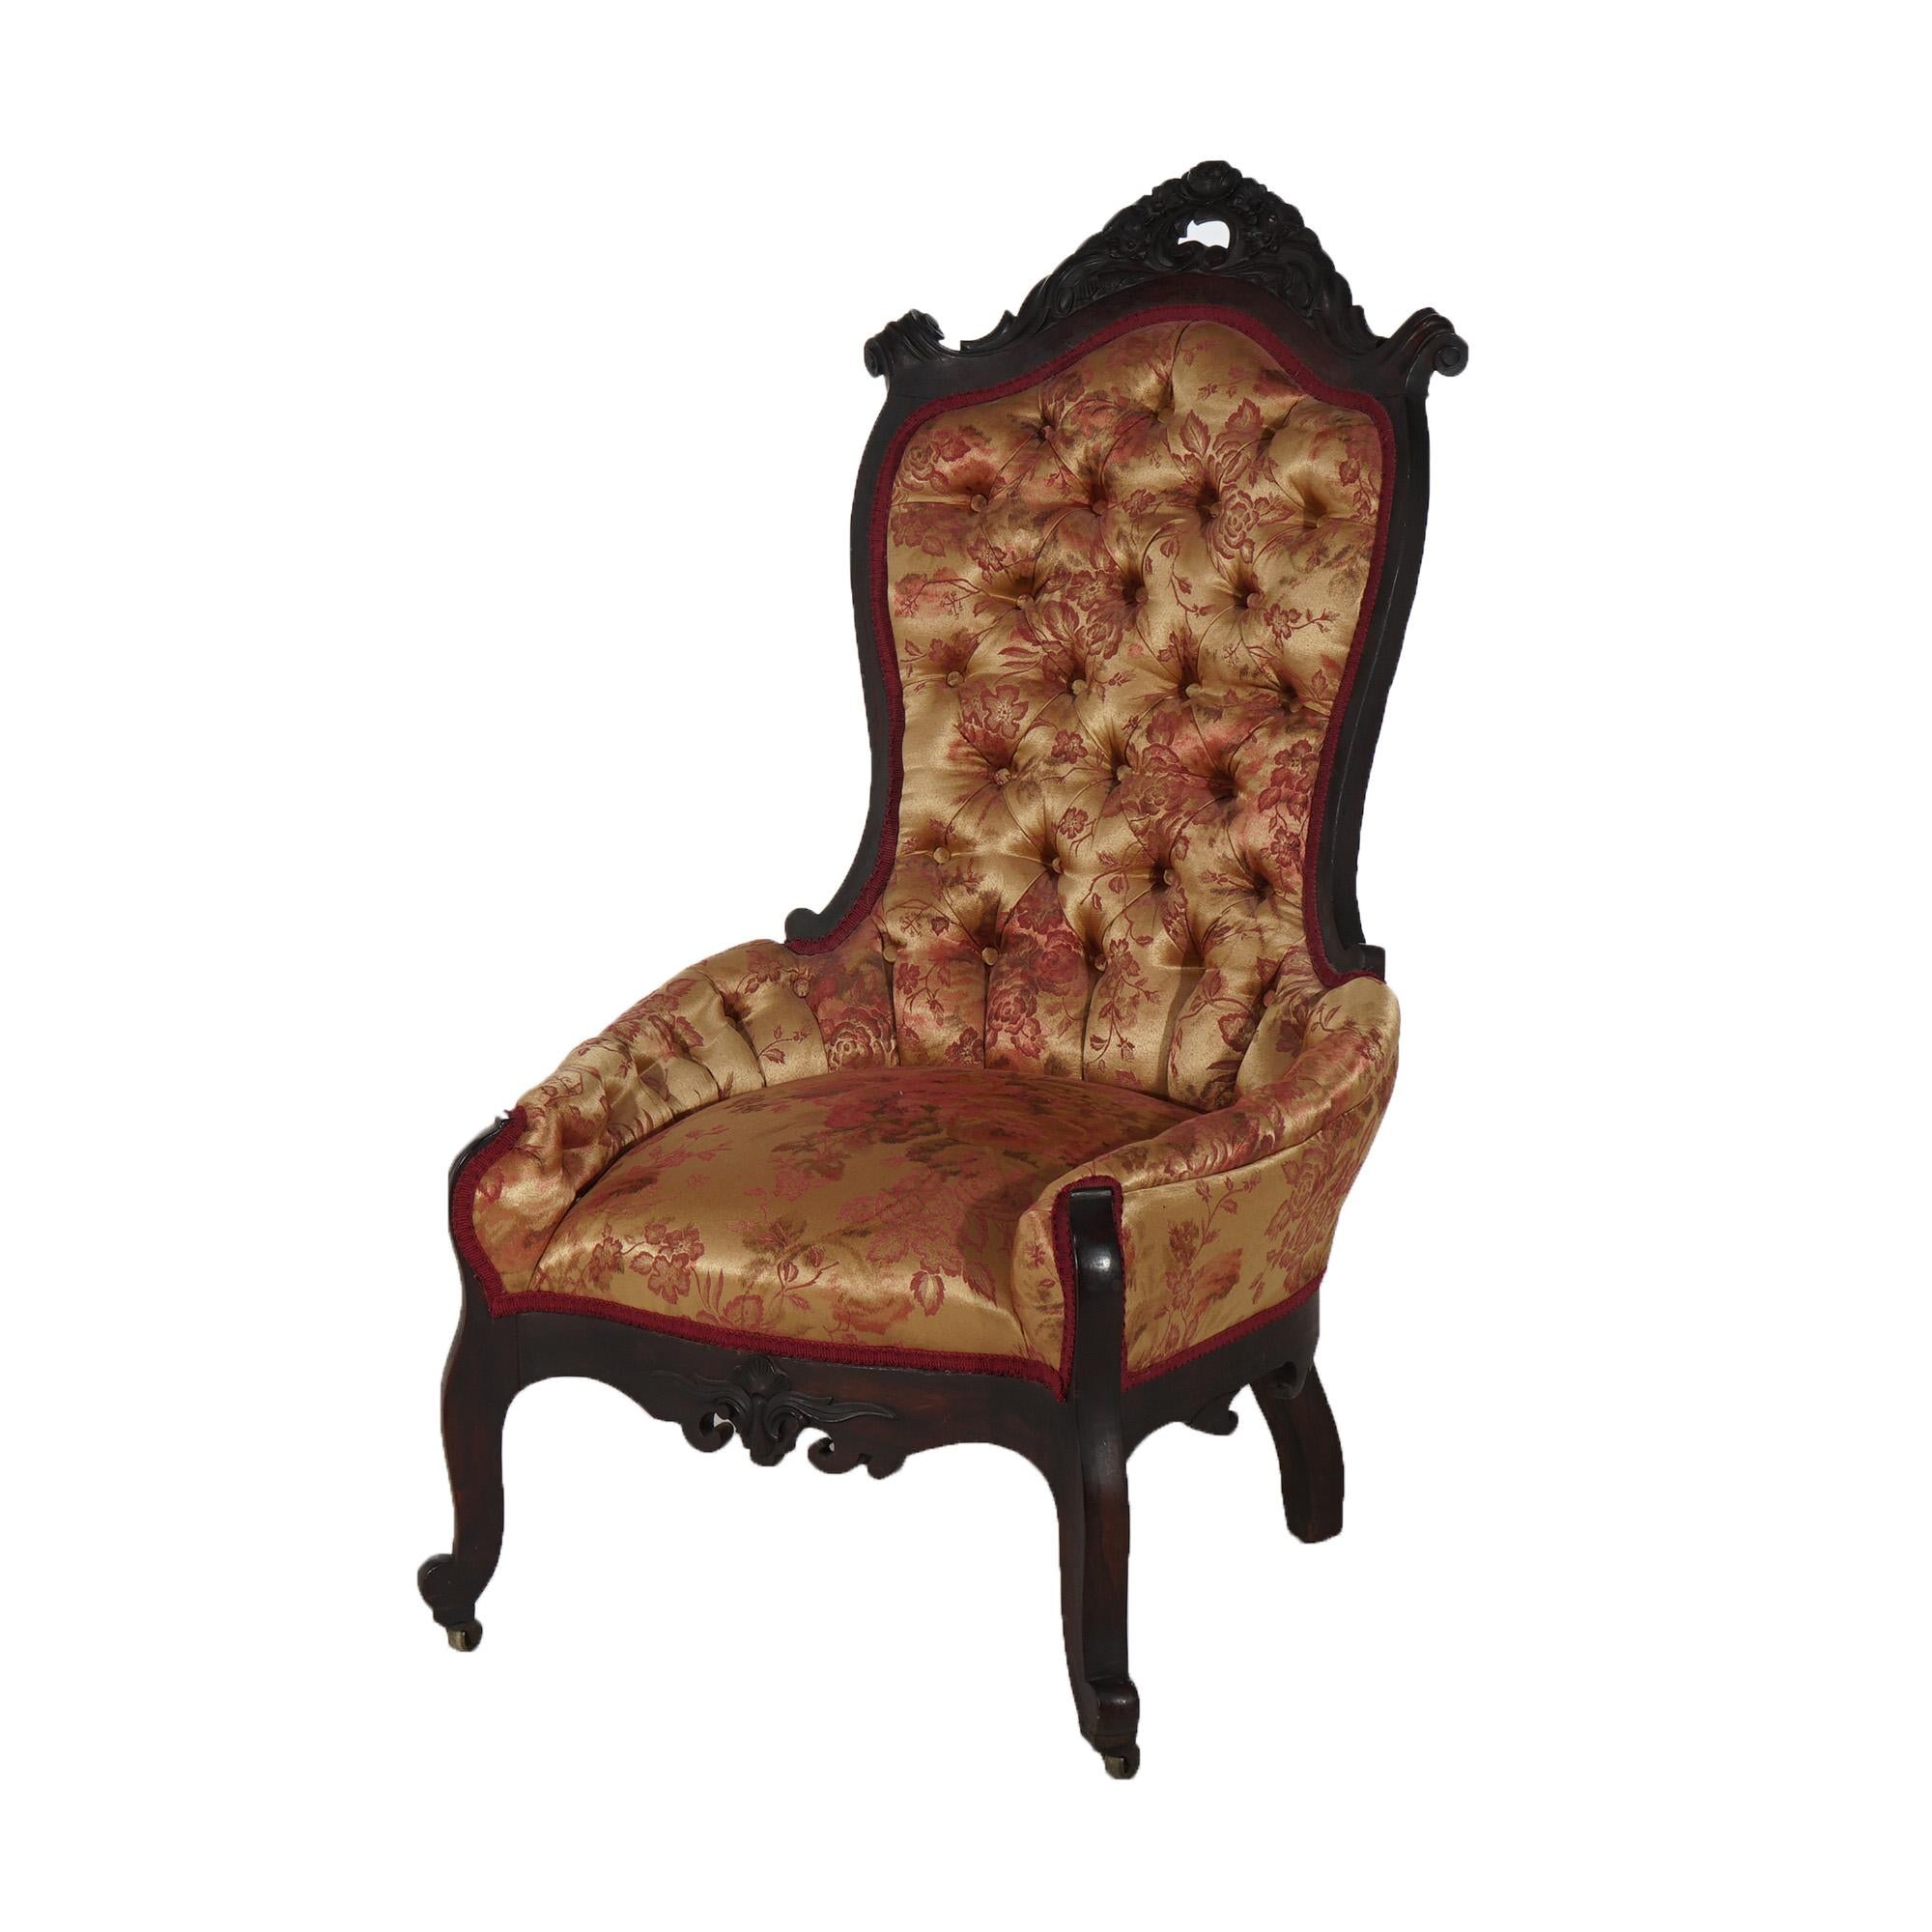 Antique Victorian Carved Walnut & Upholstered Lady’s Boudoir Chair C1890 In Good Condition For Sale In Big Flats, NY